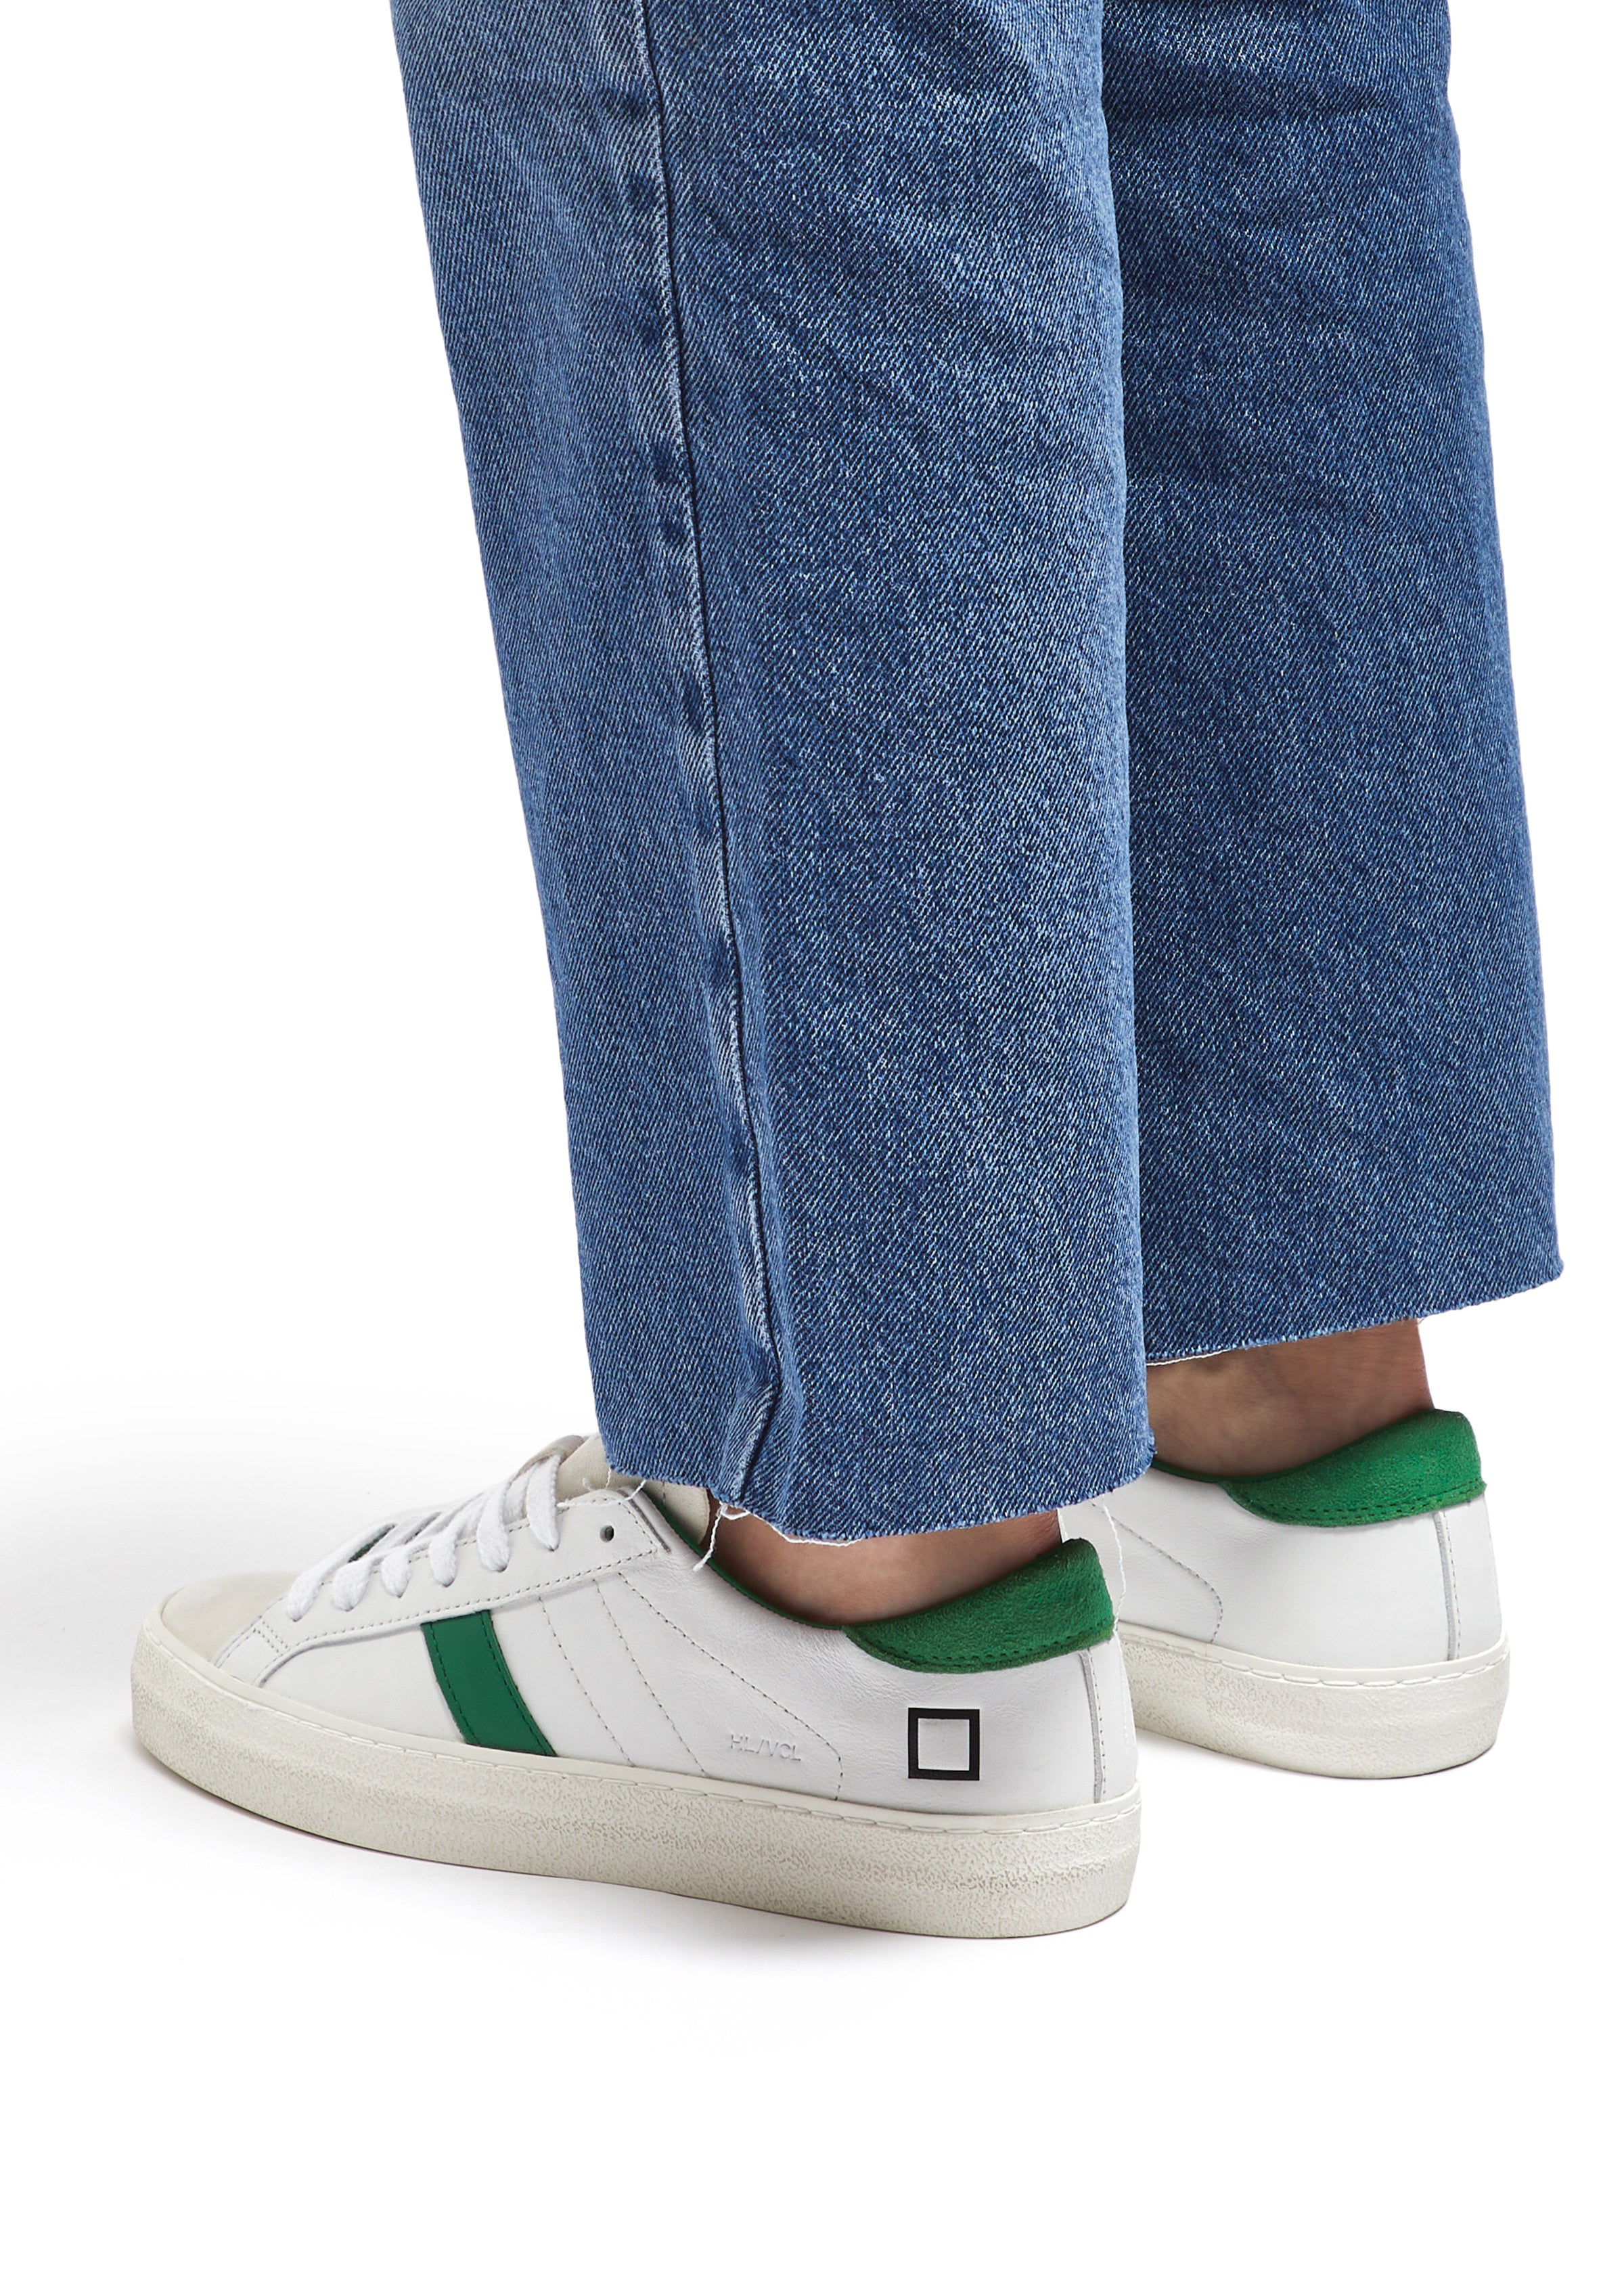 D.A.T.E HILL LOW VINTAGE COLOURED WHITE & GREEN SNEAKERS